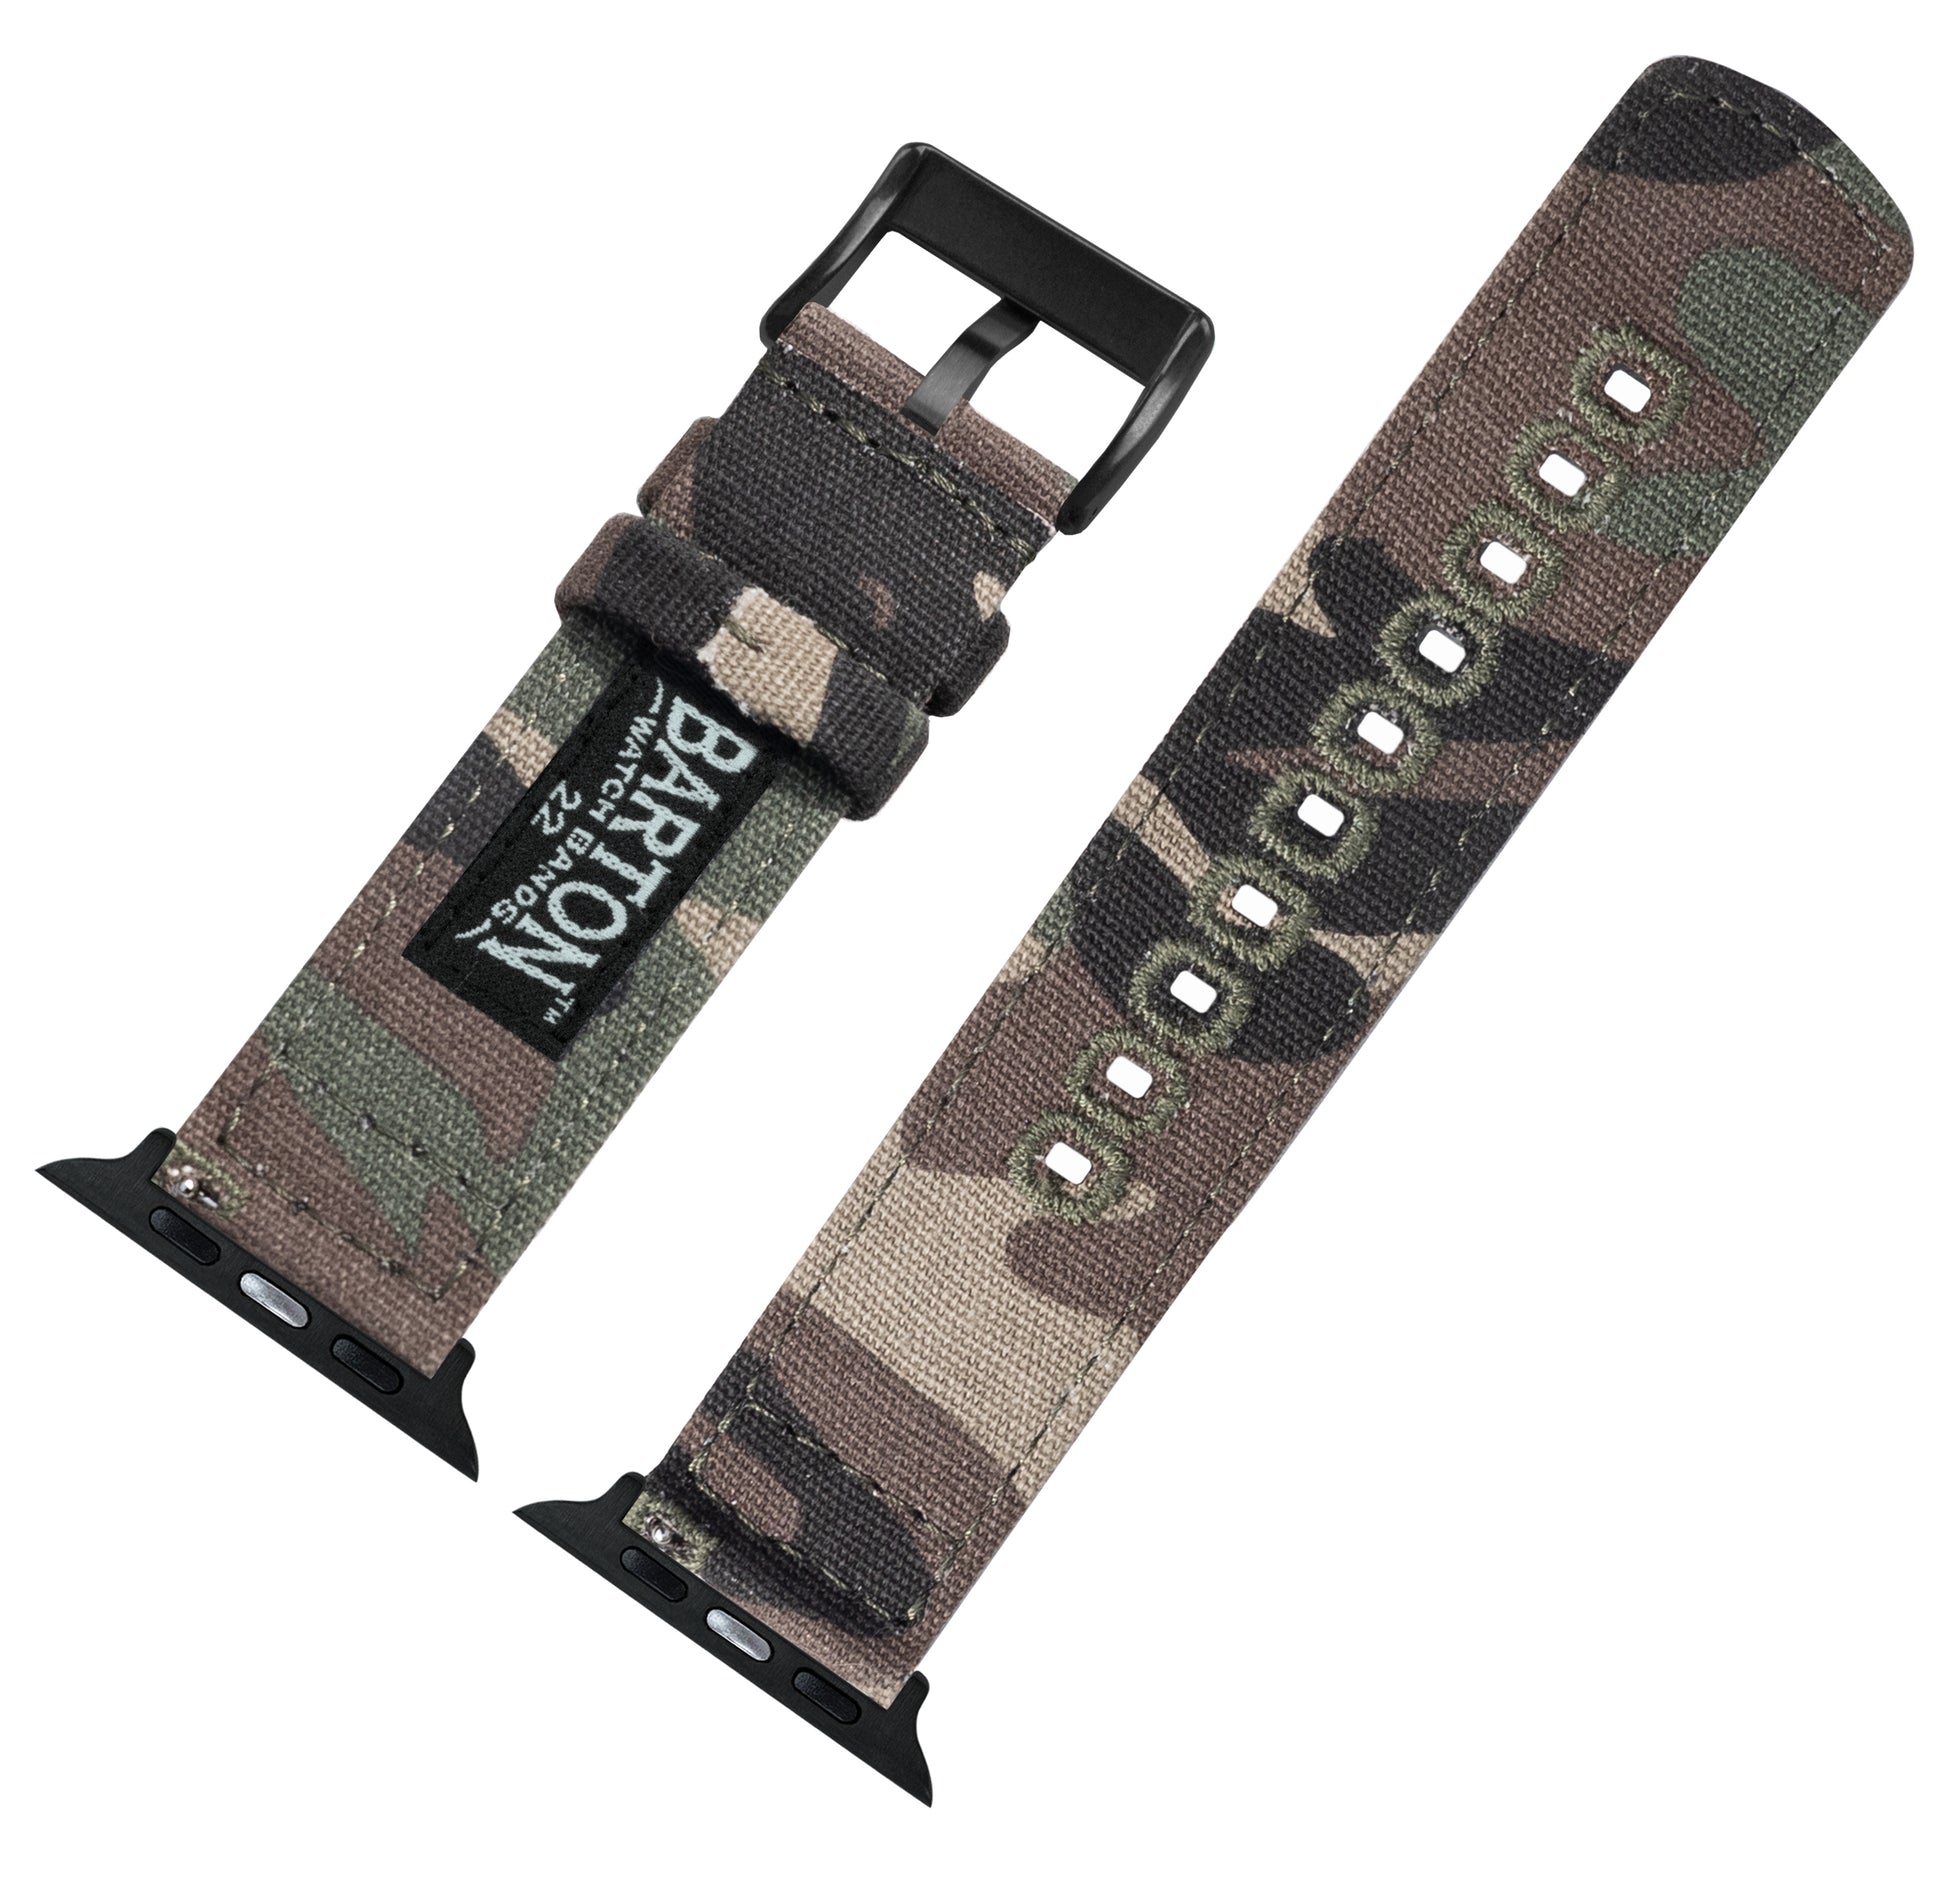 Apple Watch Elastic Apple Watch Band Camo Extra WIDE Band 